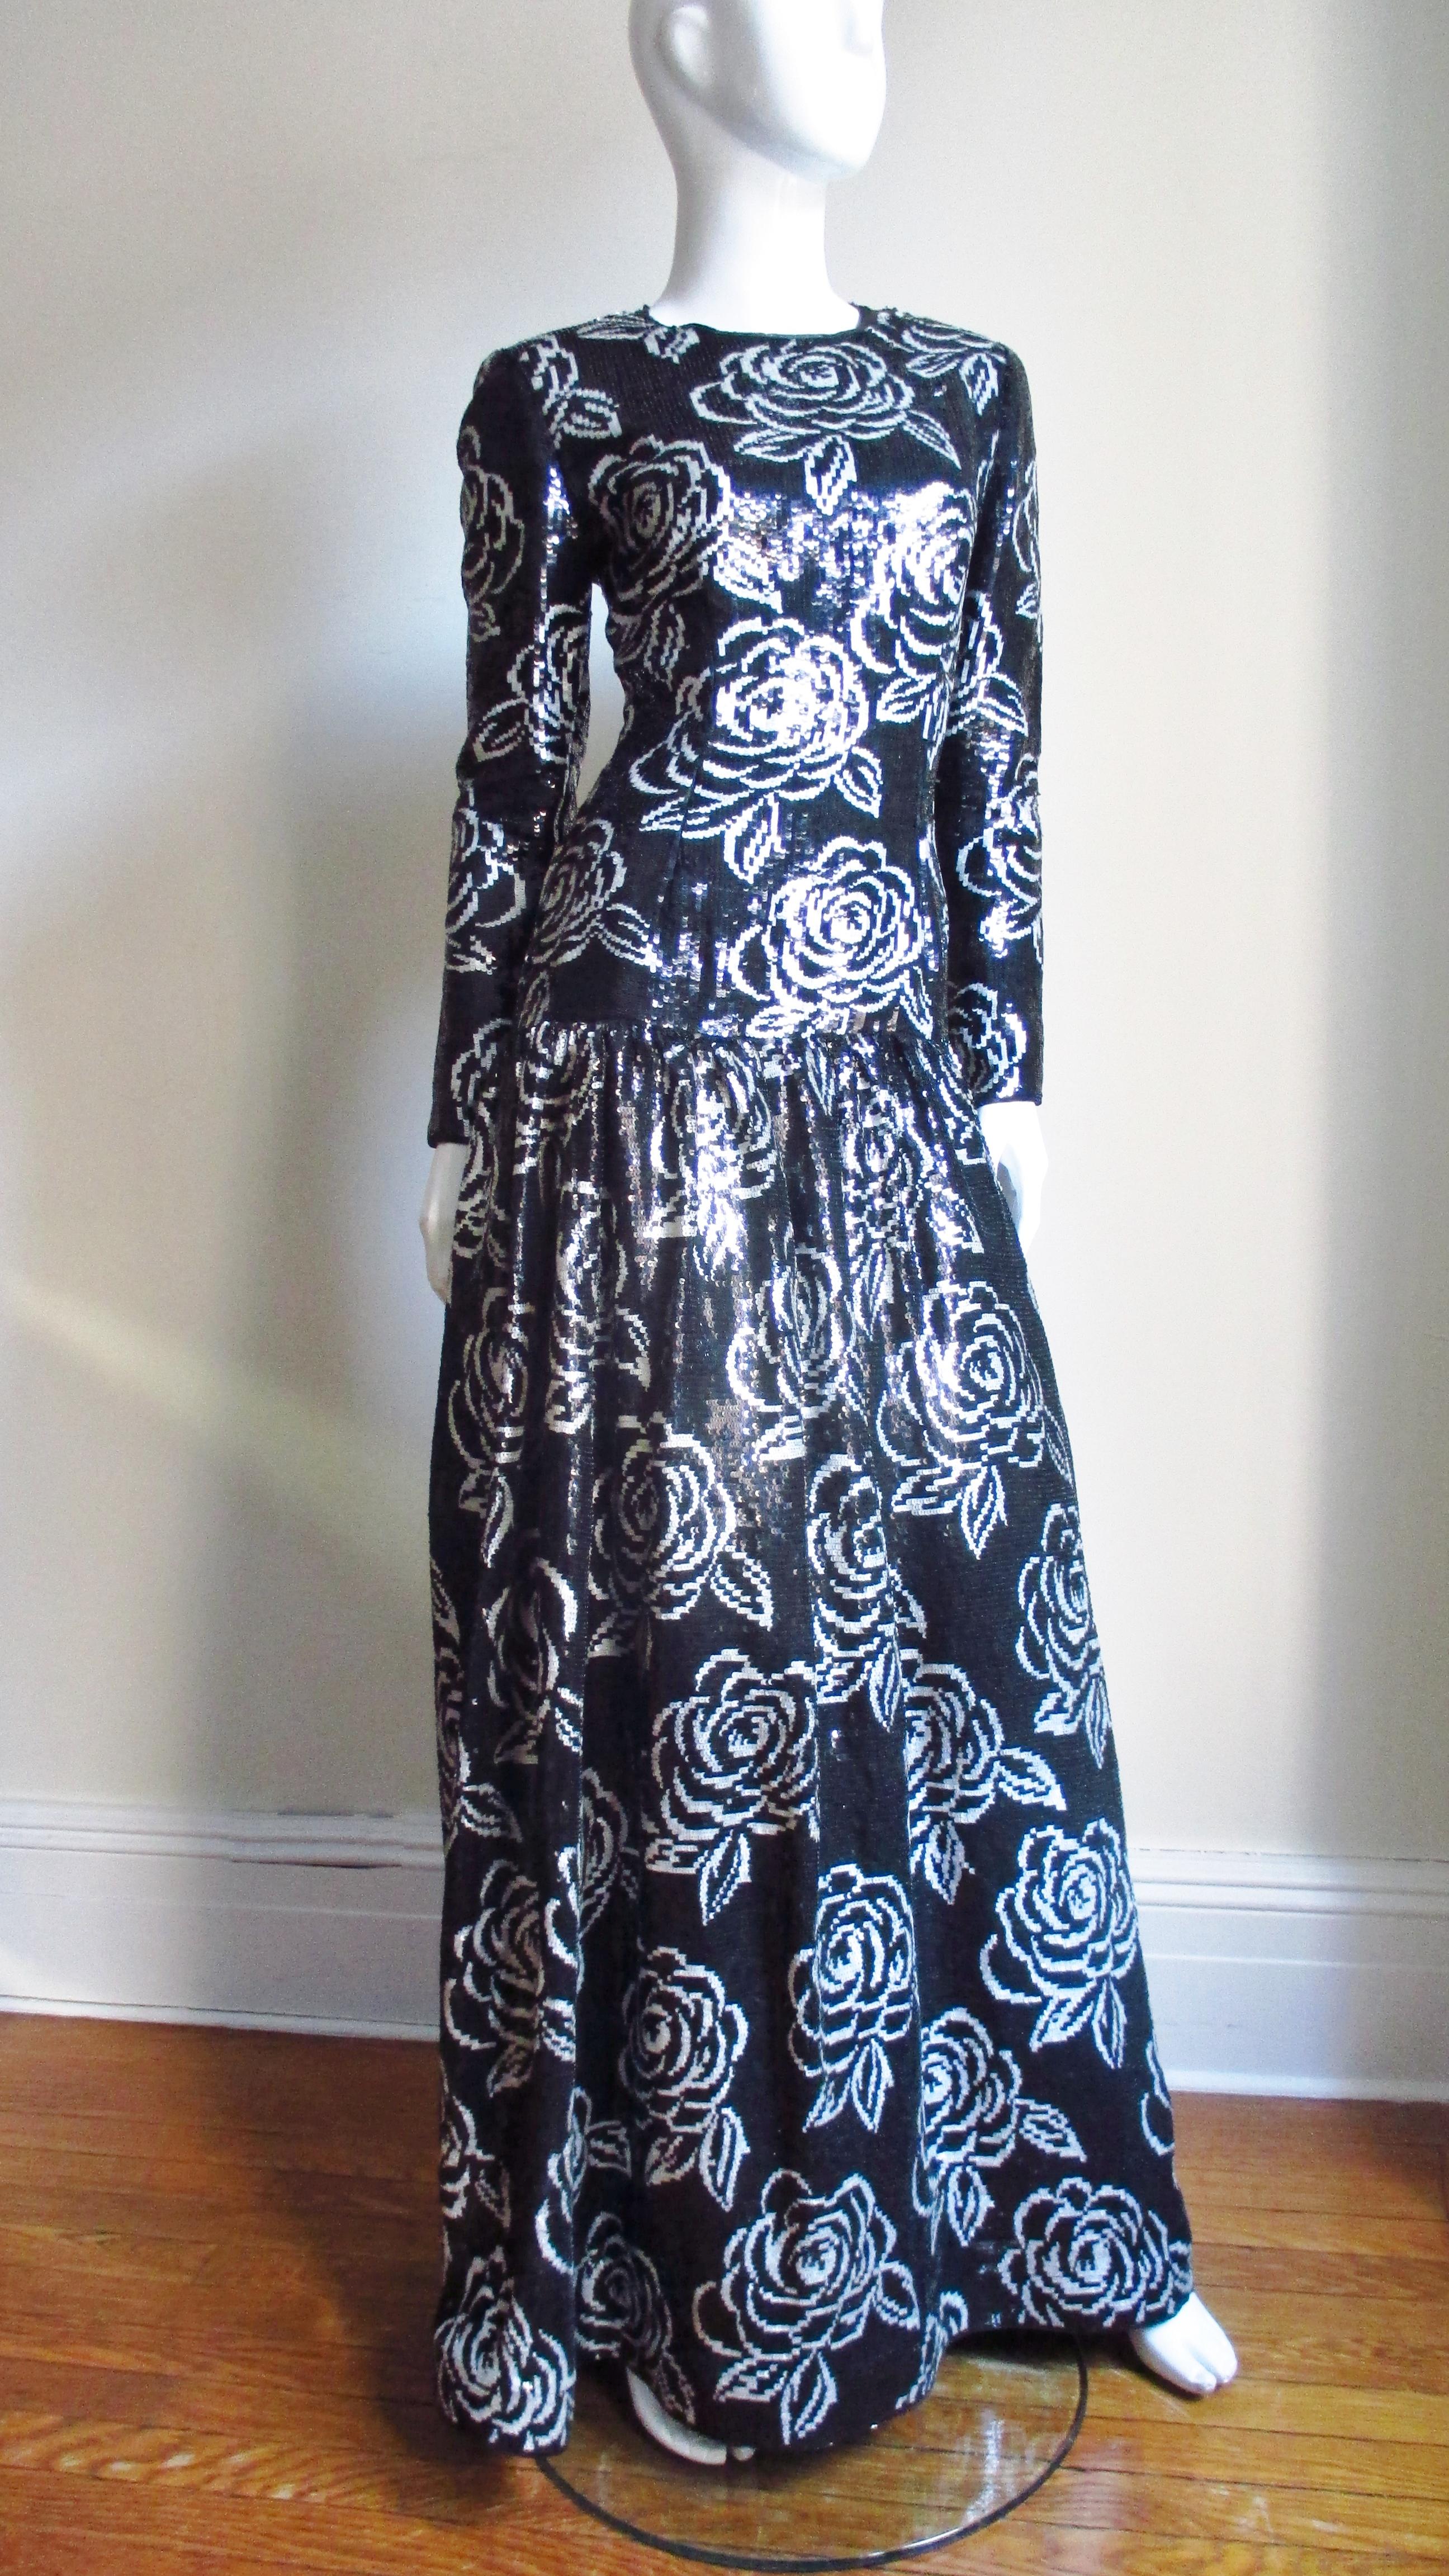 This is a work of art in black and white sequins by Oscar de la Renta.  It has long sleeves with zippers, a flattering fitted drop waist and a gathered skirt all completely covered in beautiful black and white sequins in a flower pattern on silk. 